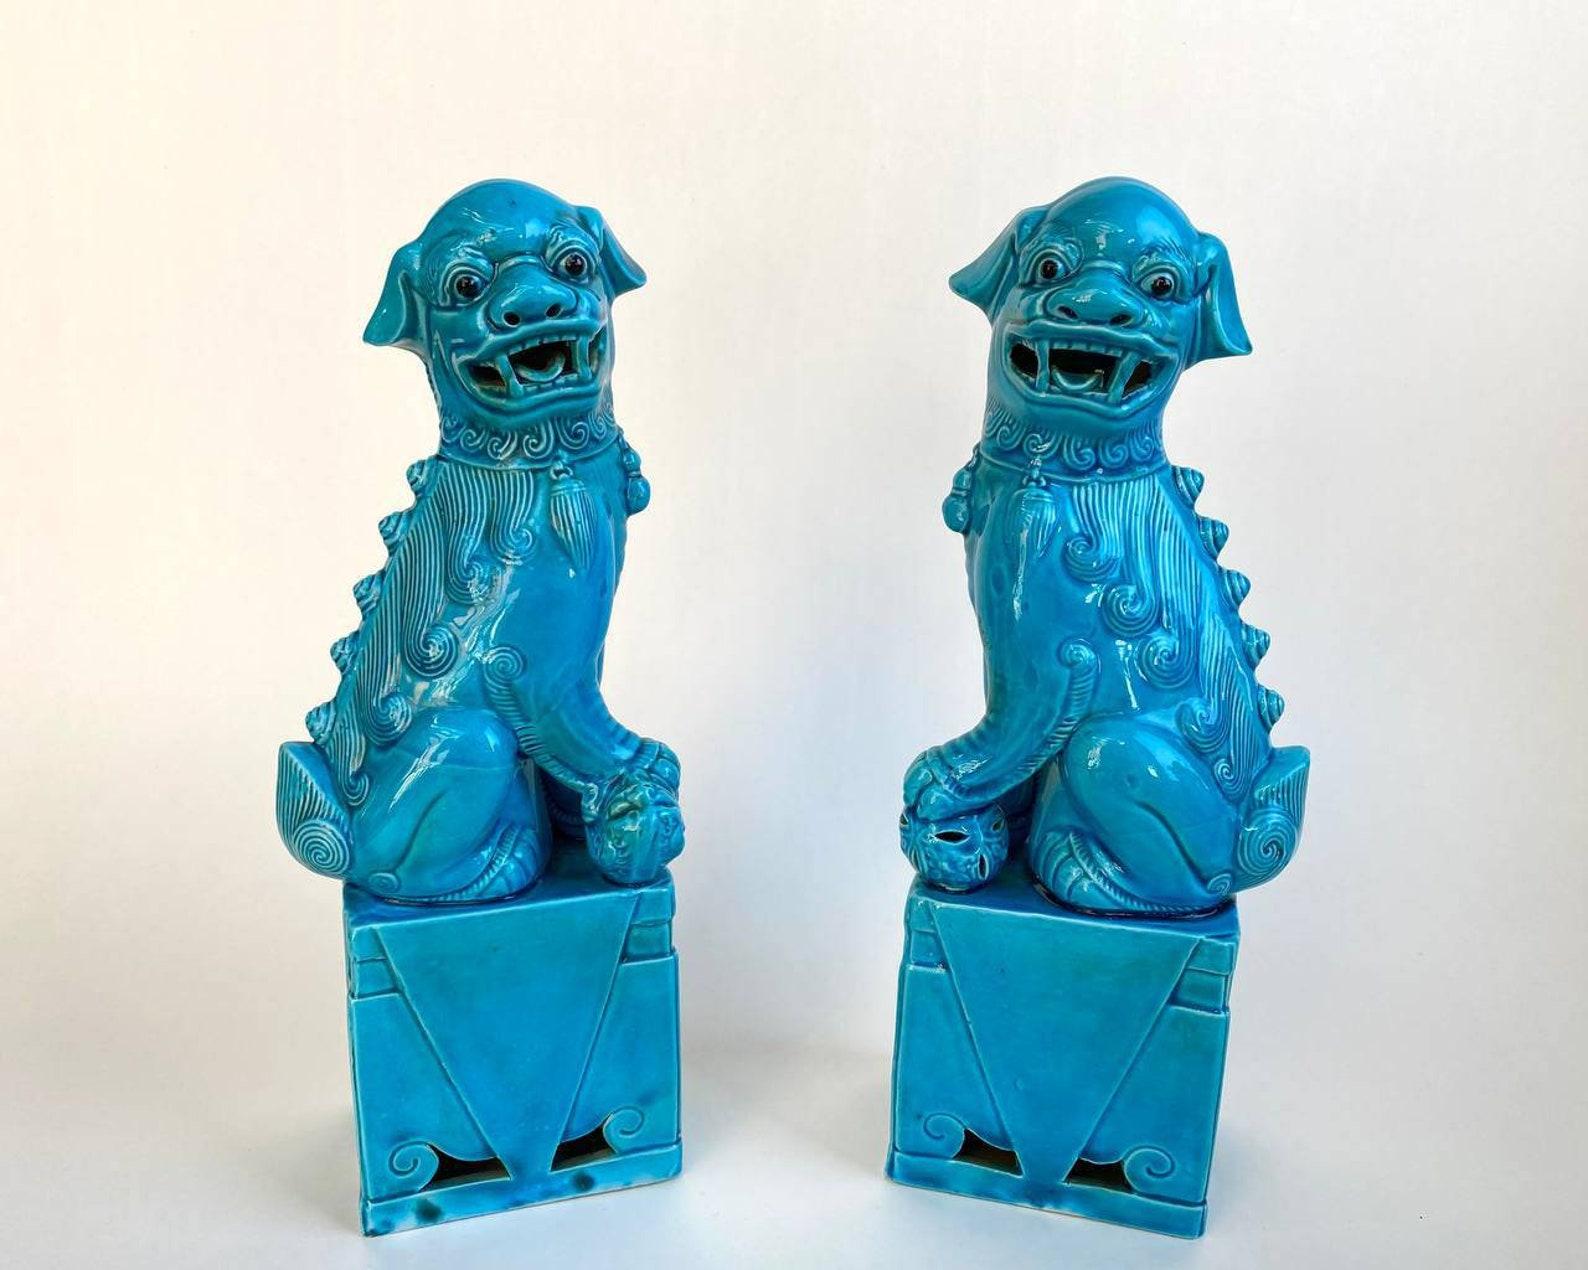  Chinese Porcelain Foo Dogs Set of two with black eyes and open mouth. 

 These turquoise  Foo Dogs, or Chinese guardian lions, are fun accents for any coffee table or bookcase. Each piece was handcrafted by talented artisans. Imperfection is part